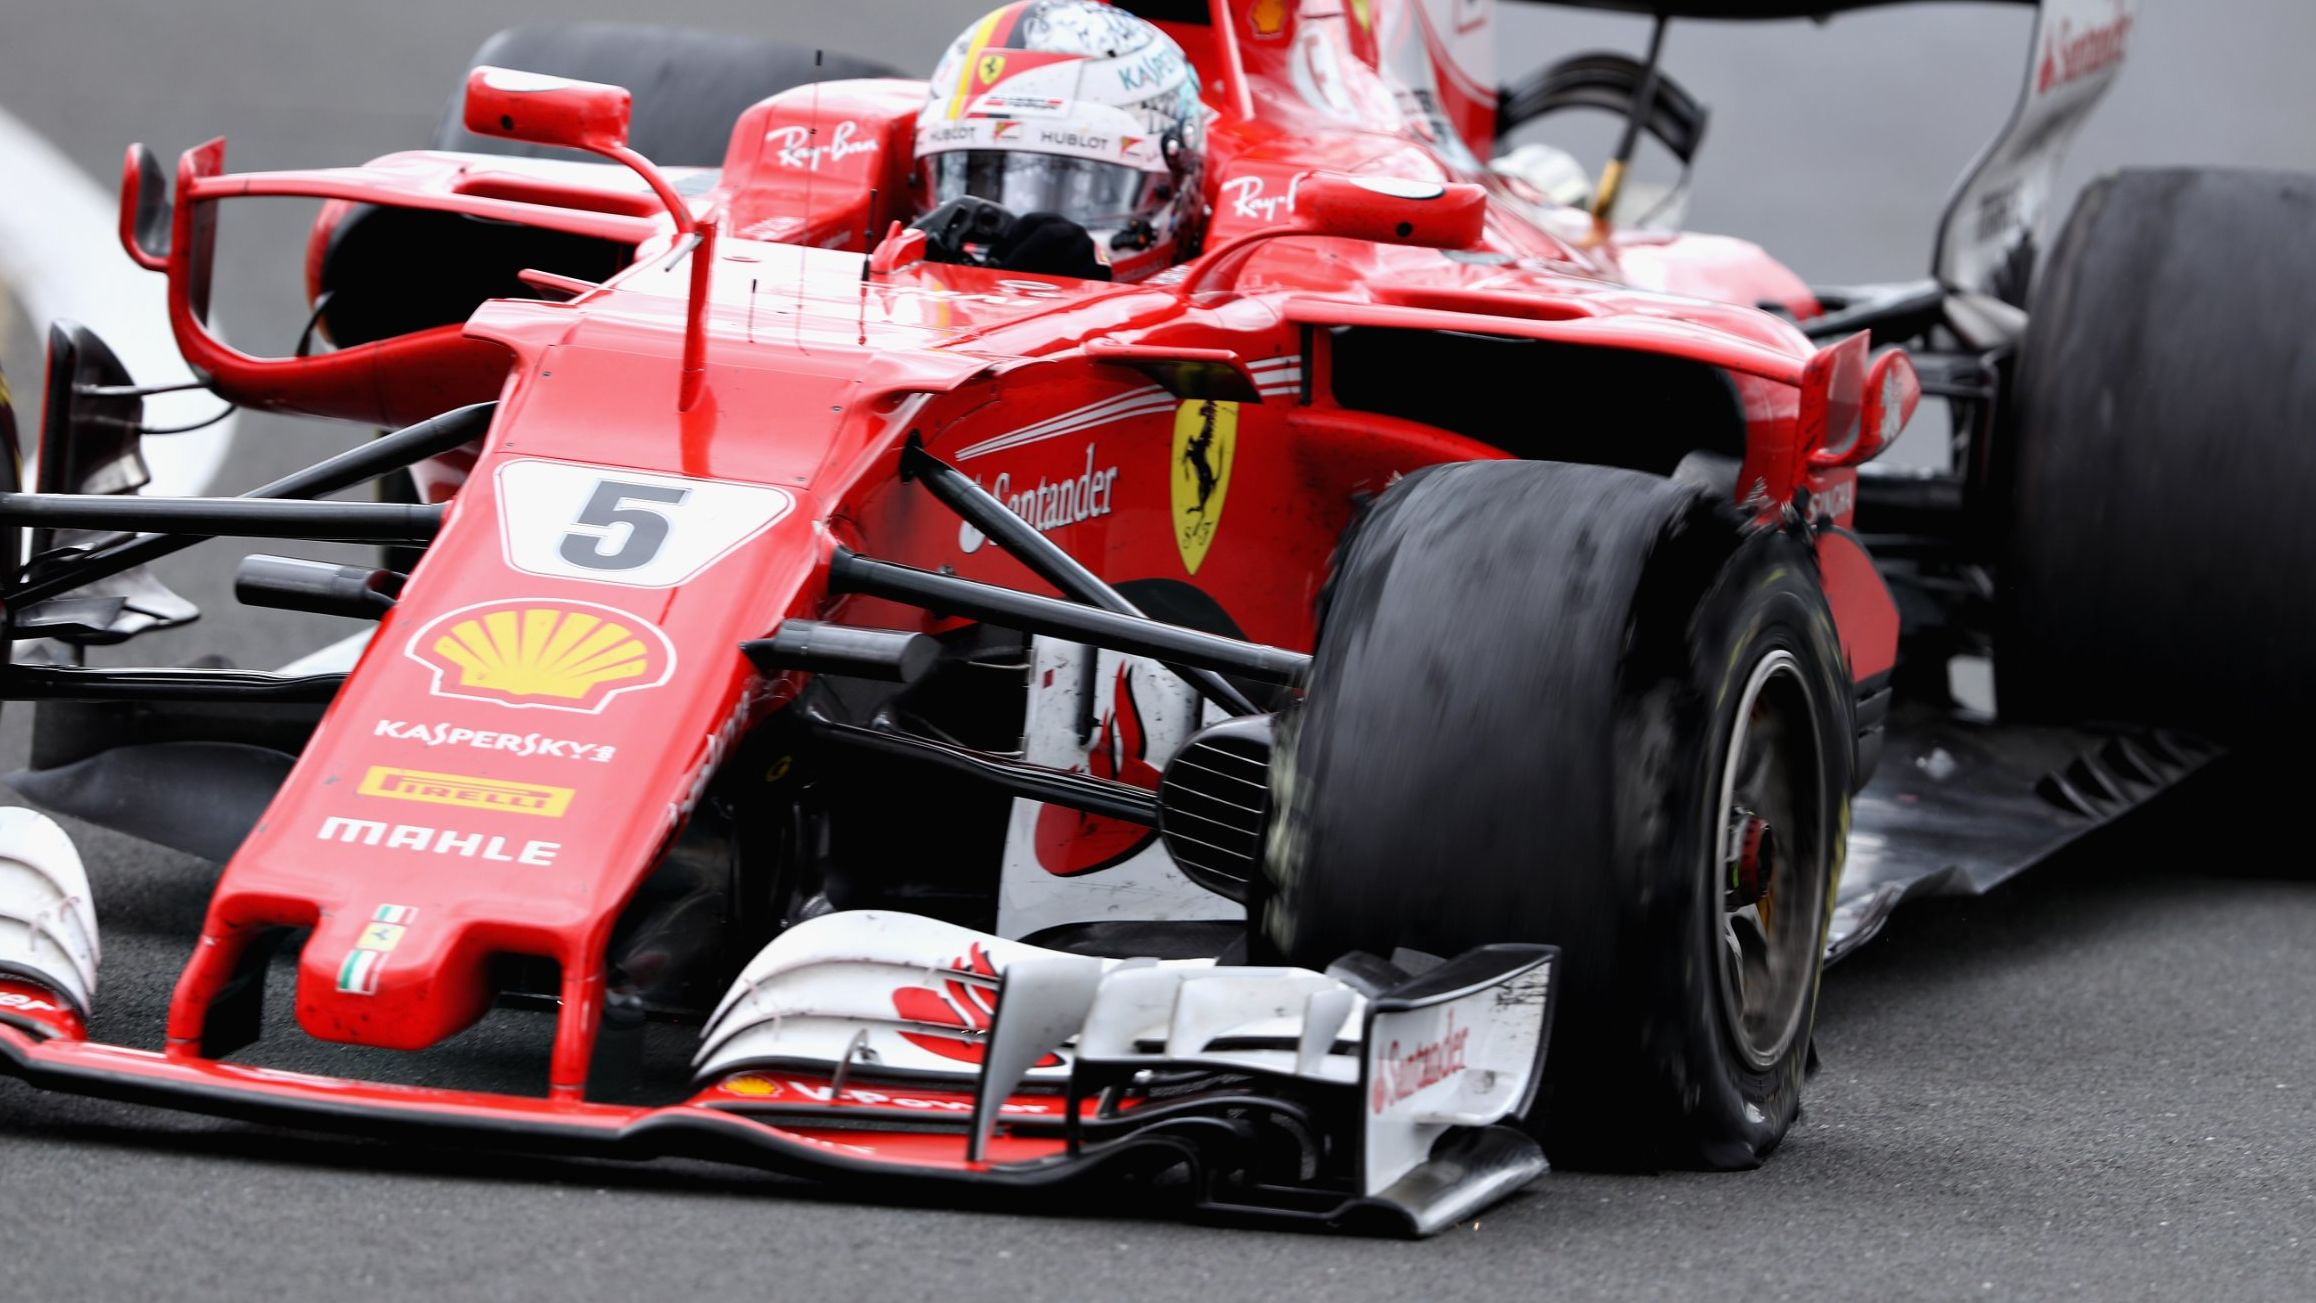 Sebastian Vettel drives his Ferrari with a puncture clearly noticeable on his shredded front left tire.